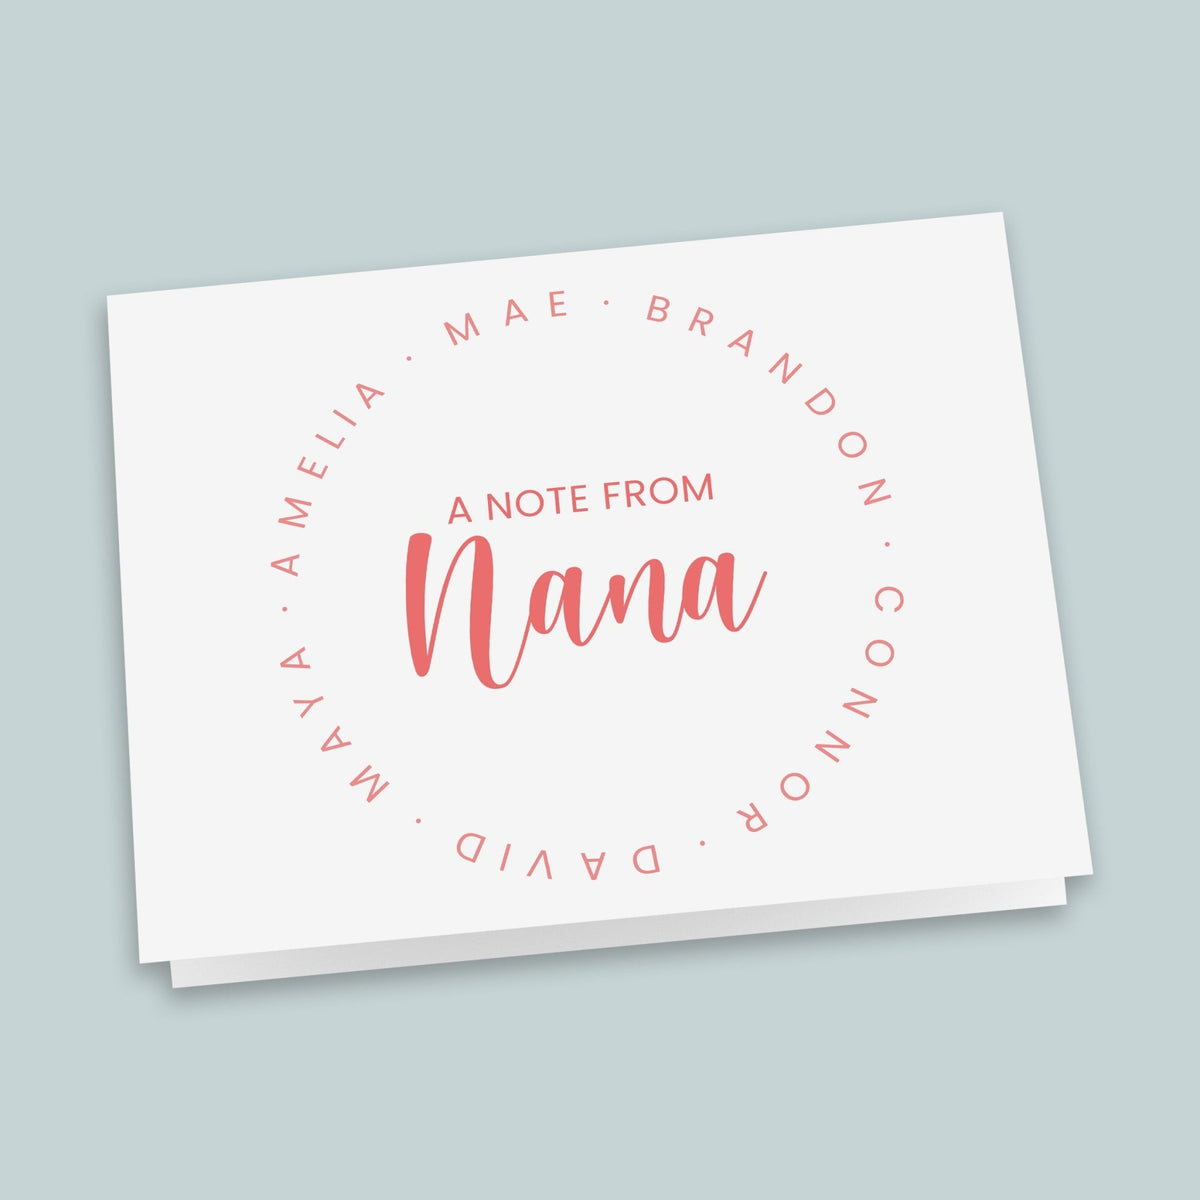 Family Circle Notes from Nana - Personalized Folded Note Card - The Note House